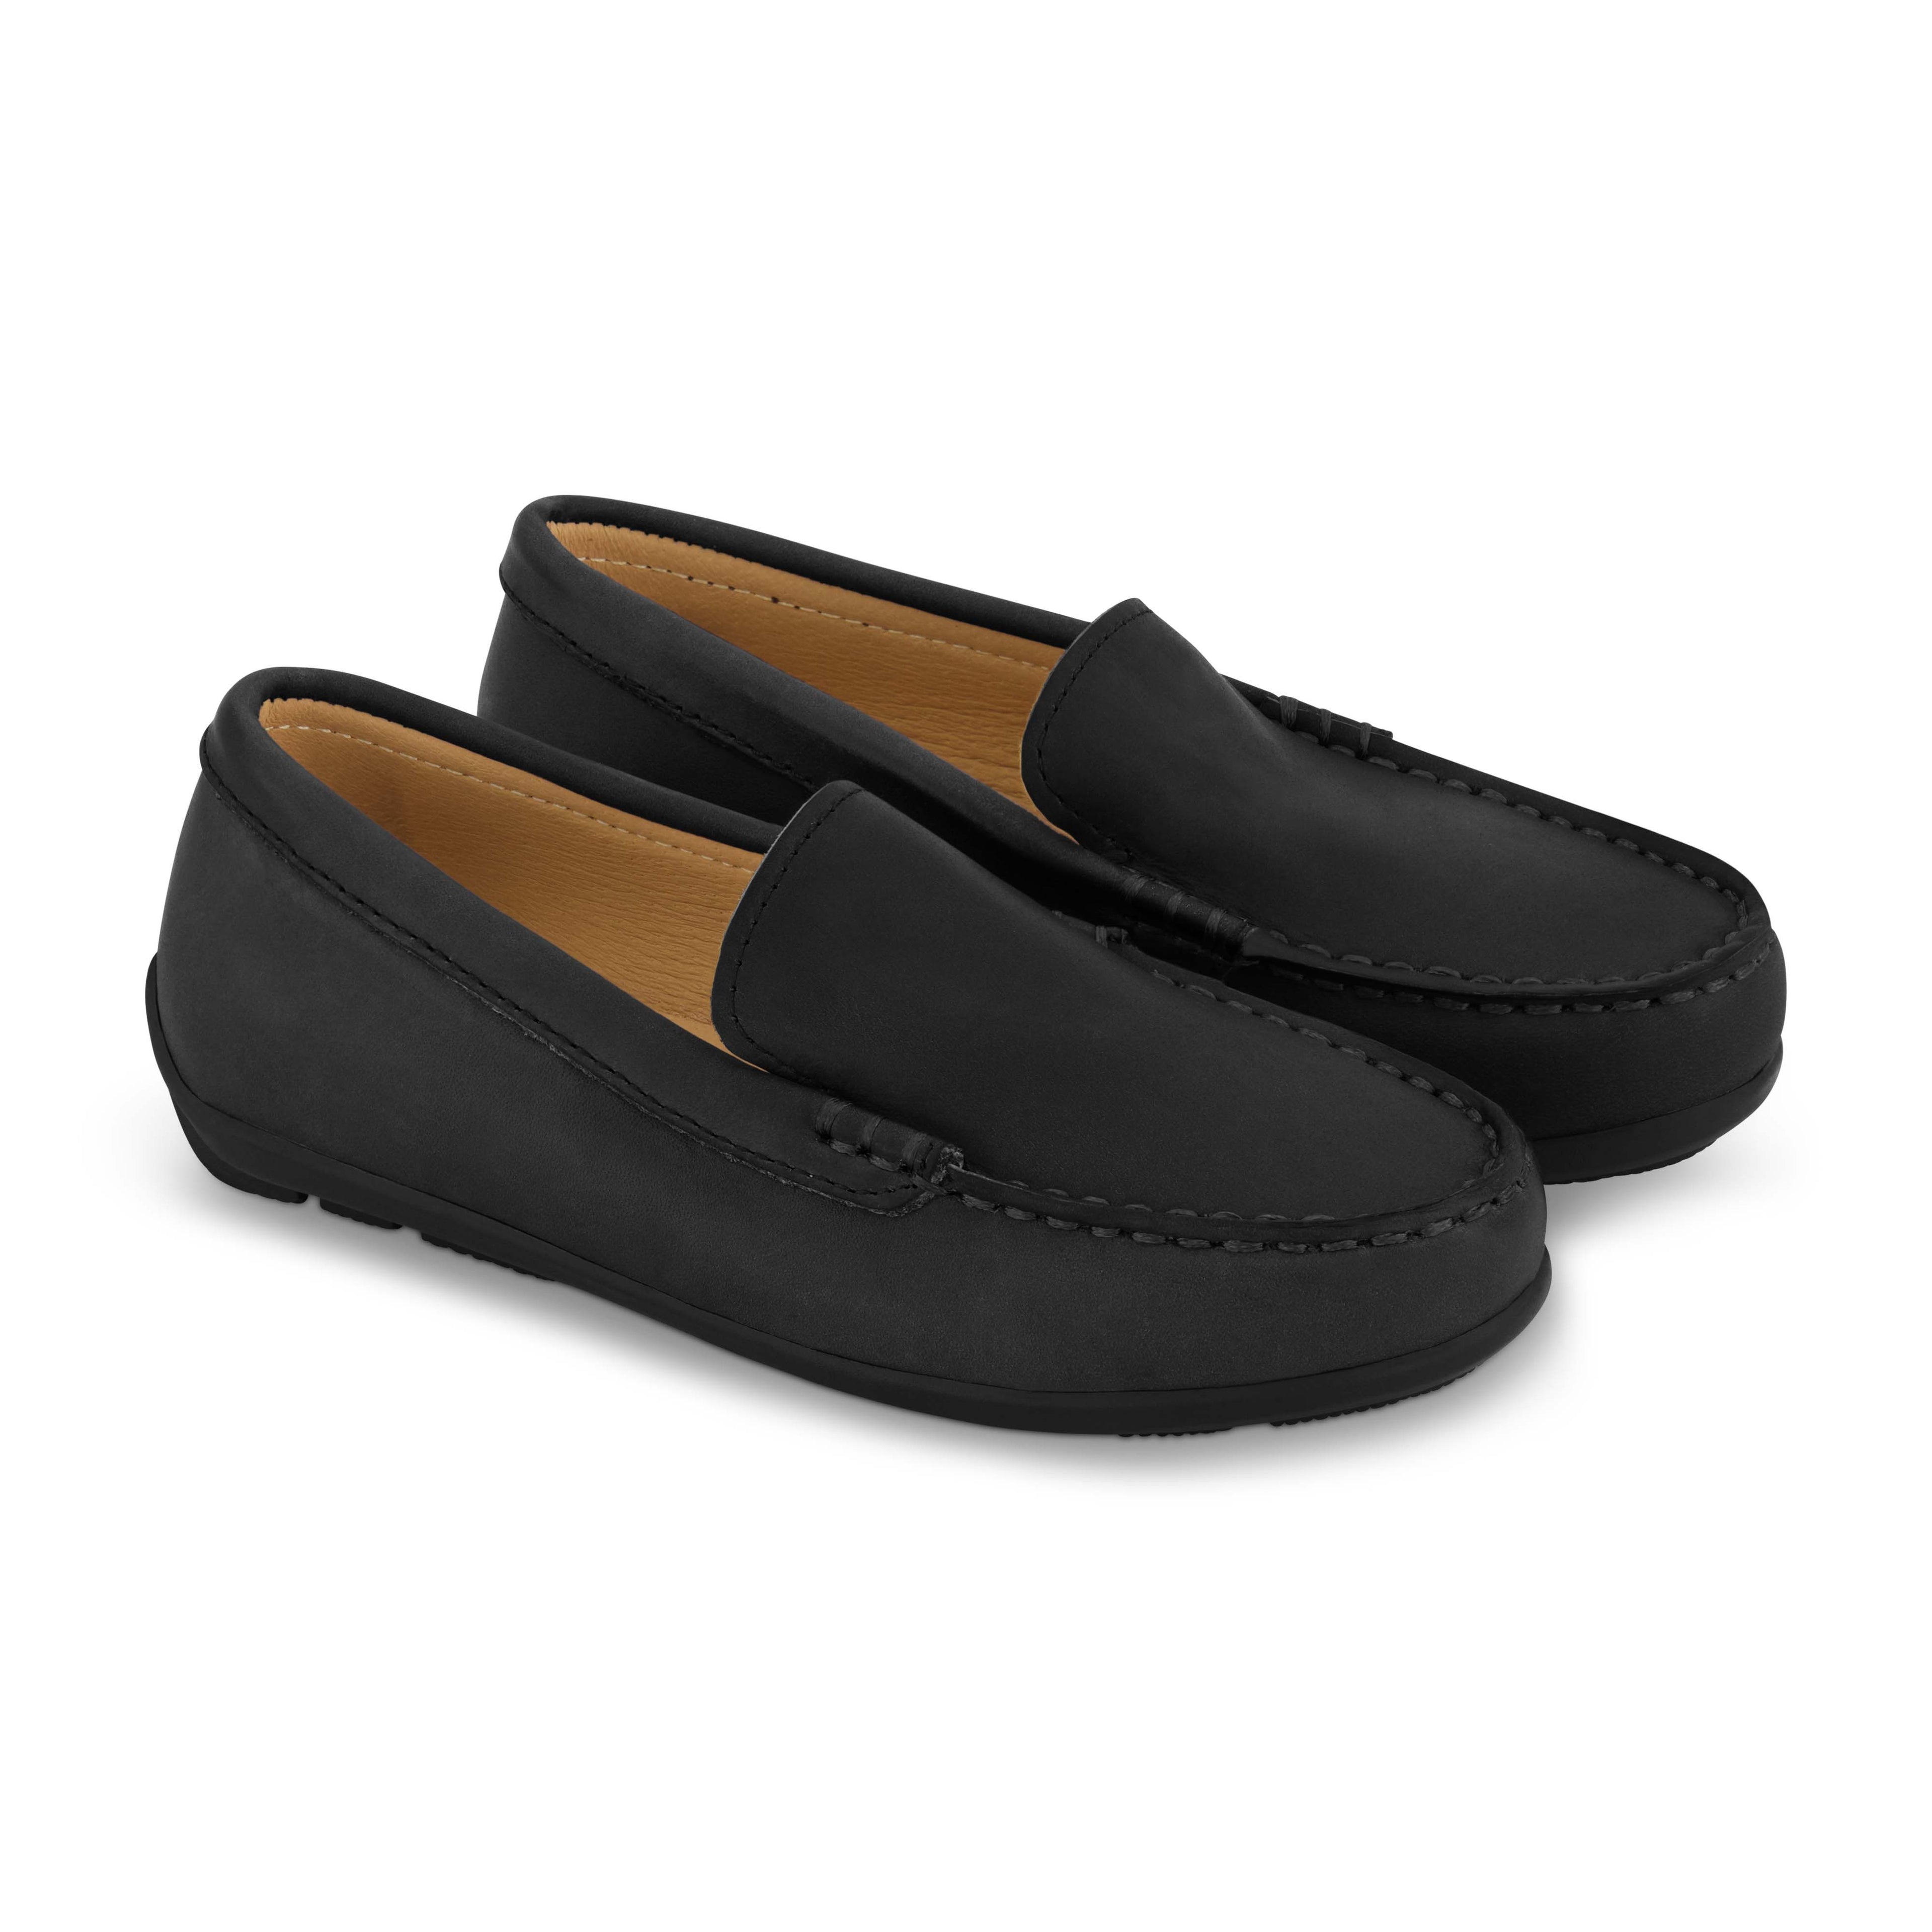 Leather Moccasin - Hard Sole